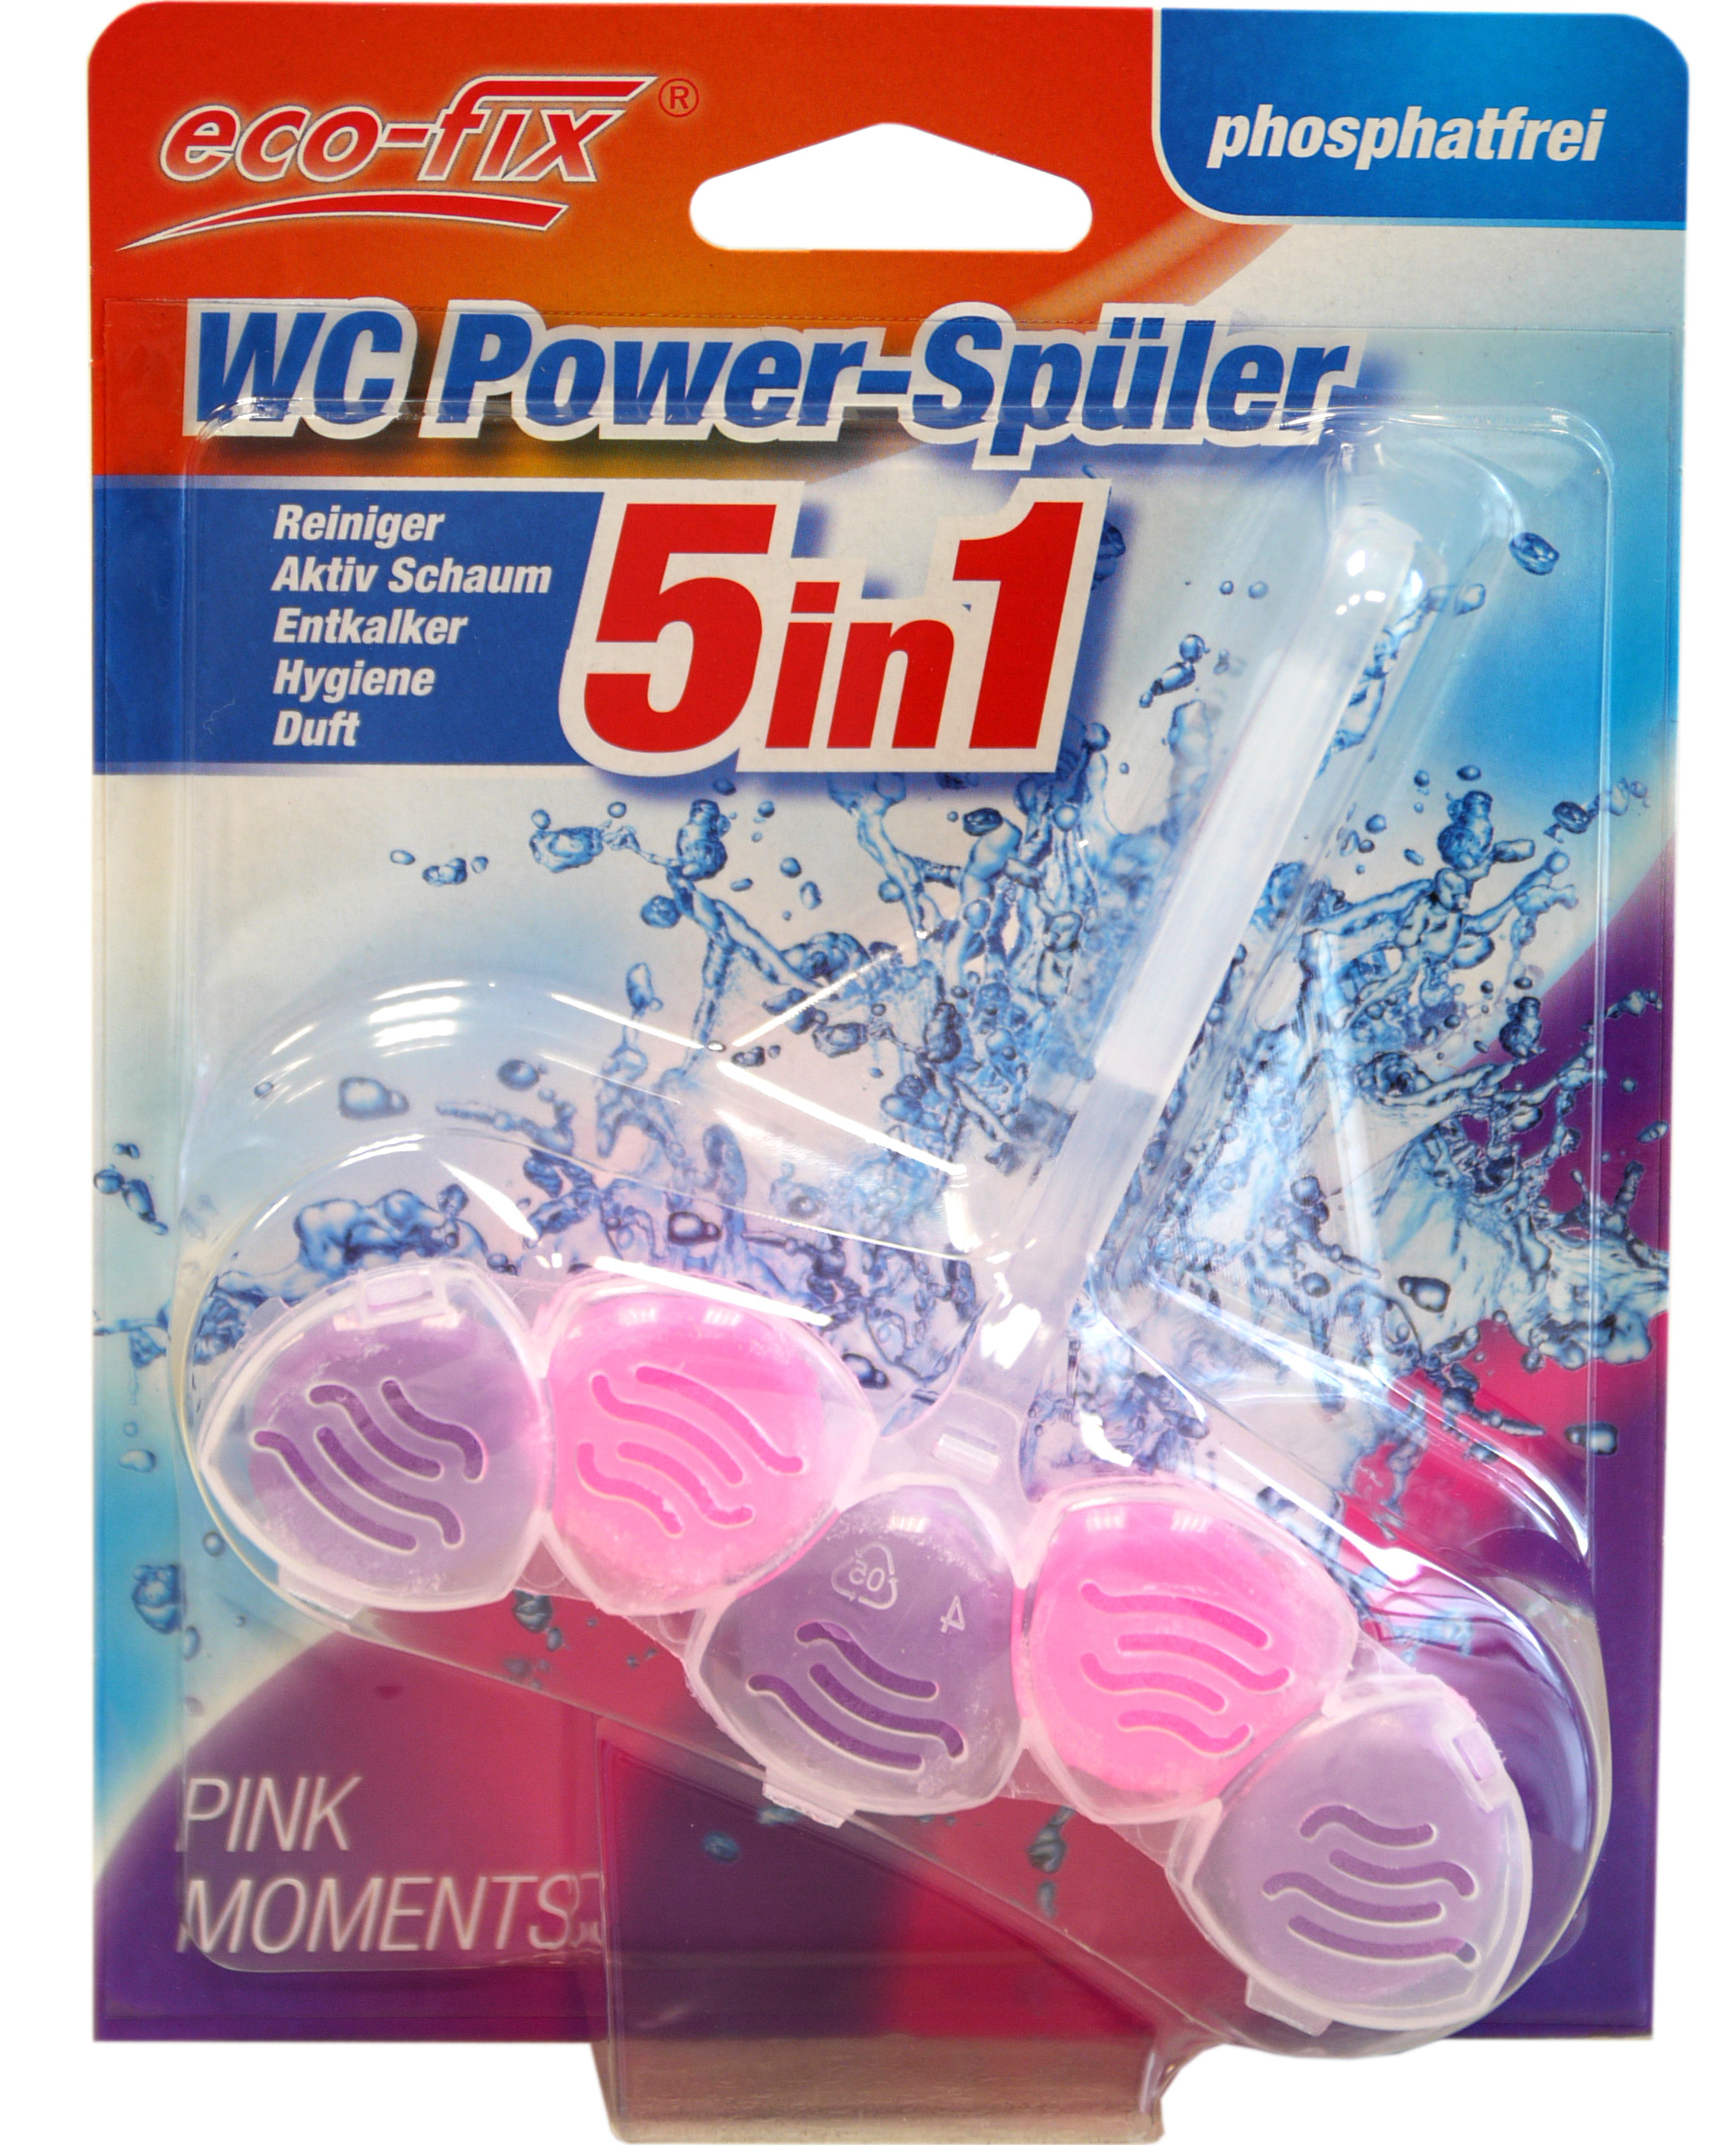 eco-fix toilet power5in1 Pink Moments